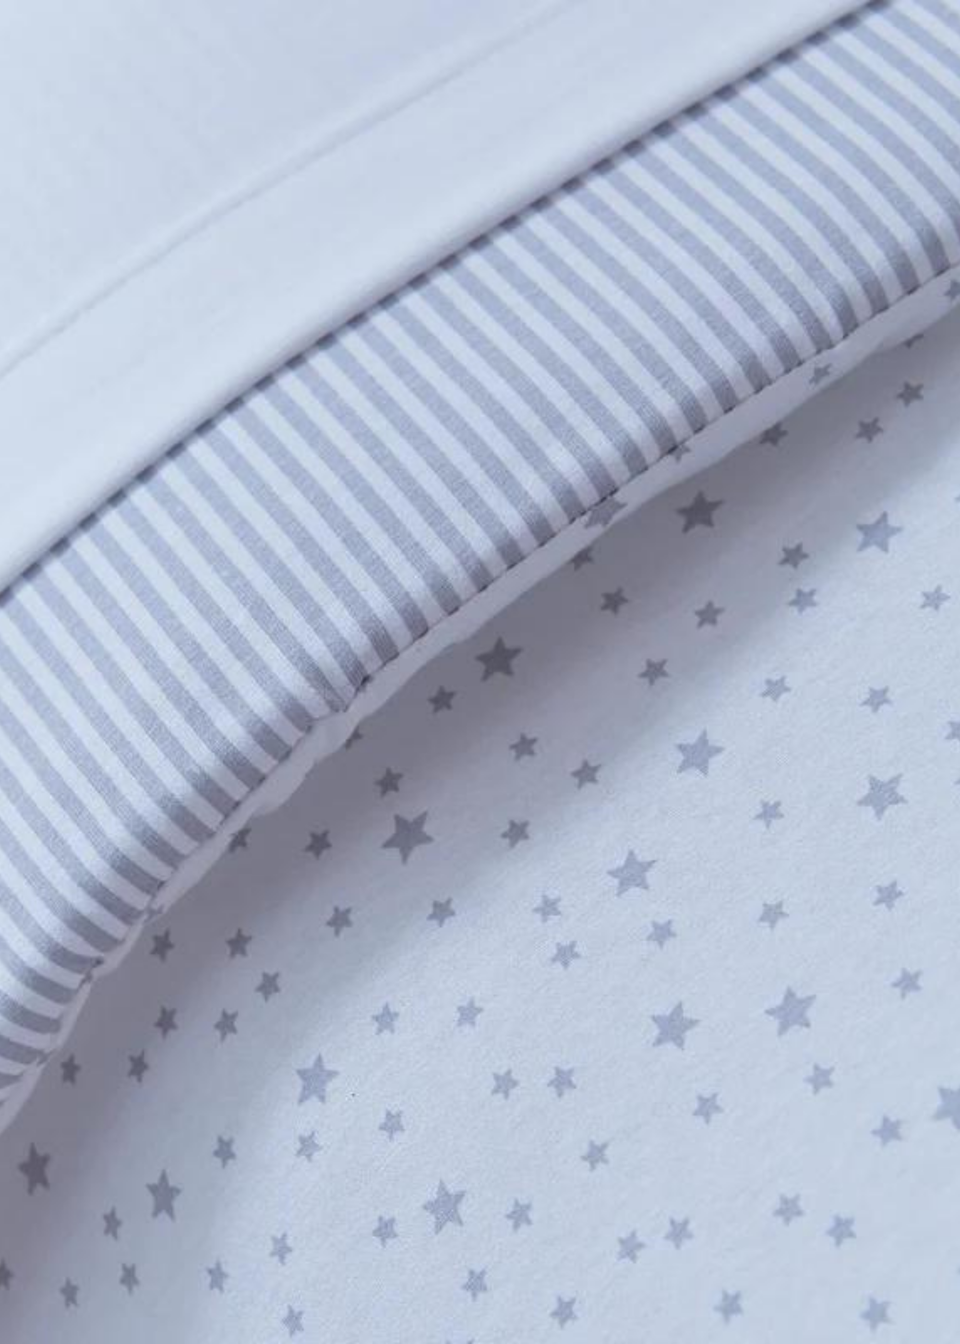 Clair de Lune 2 Pack Stars & Stripes Fitted Cot Bed Sheets